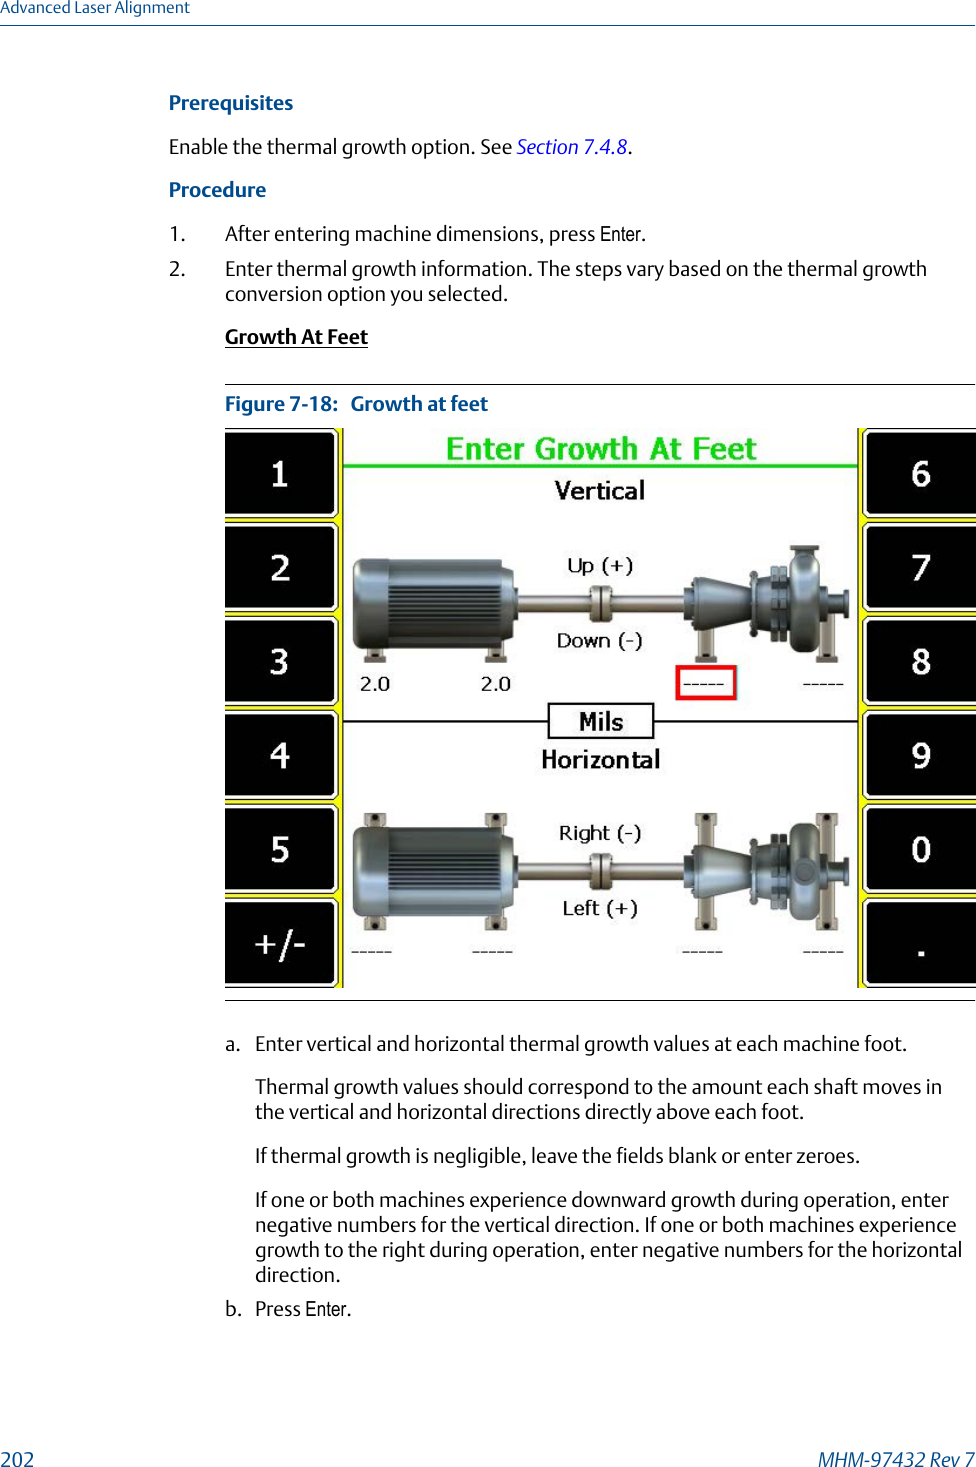 PrerequisitesEnable the thermal growth option. See Section 7.4.8.Procedure1. After entering machine dimensions, press Enter.2. Enter thermal growth information. The steps vary based on the thermal growthconversion option you selected.Growth At FeetGrowth at feetFigure 7-18:   a. Enter vertical and horizontal thermal growth values at each machine foot.Thermal growth values should correspond to the amount each shaft moves inthe vertical and horizontal directions directly above each foot.If thermal growth is negligible, leave the fields blank or enter zeroes.If one or both machines experience downward growth during operation, enternegative numbers for the vertical direction. If one or both machines experiencegrowth to the right during operation, enter negative numbers for the horizontaldirection.b. Press Enter.Advanced Laser Alignment202 MHM-97432 Rev 7